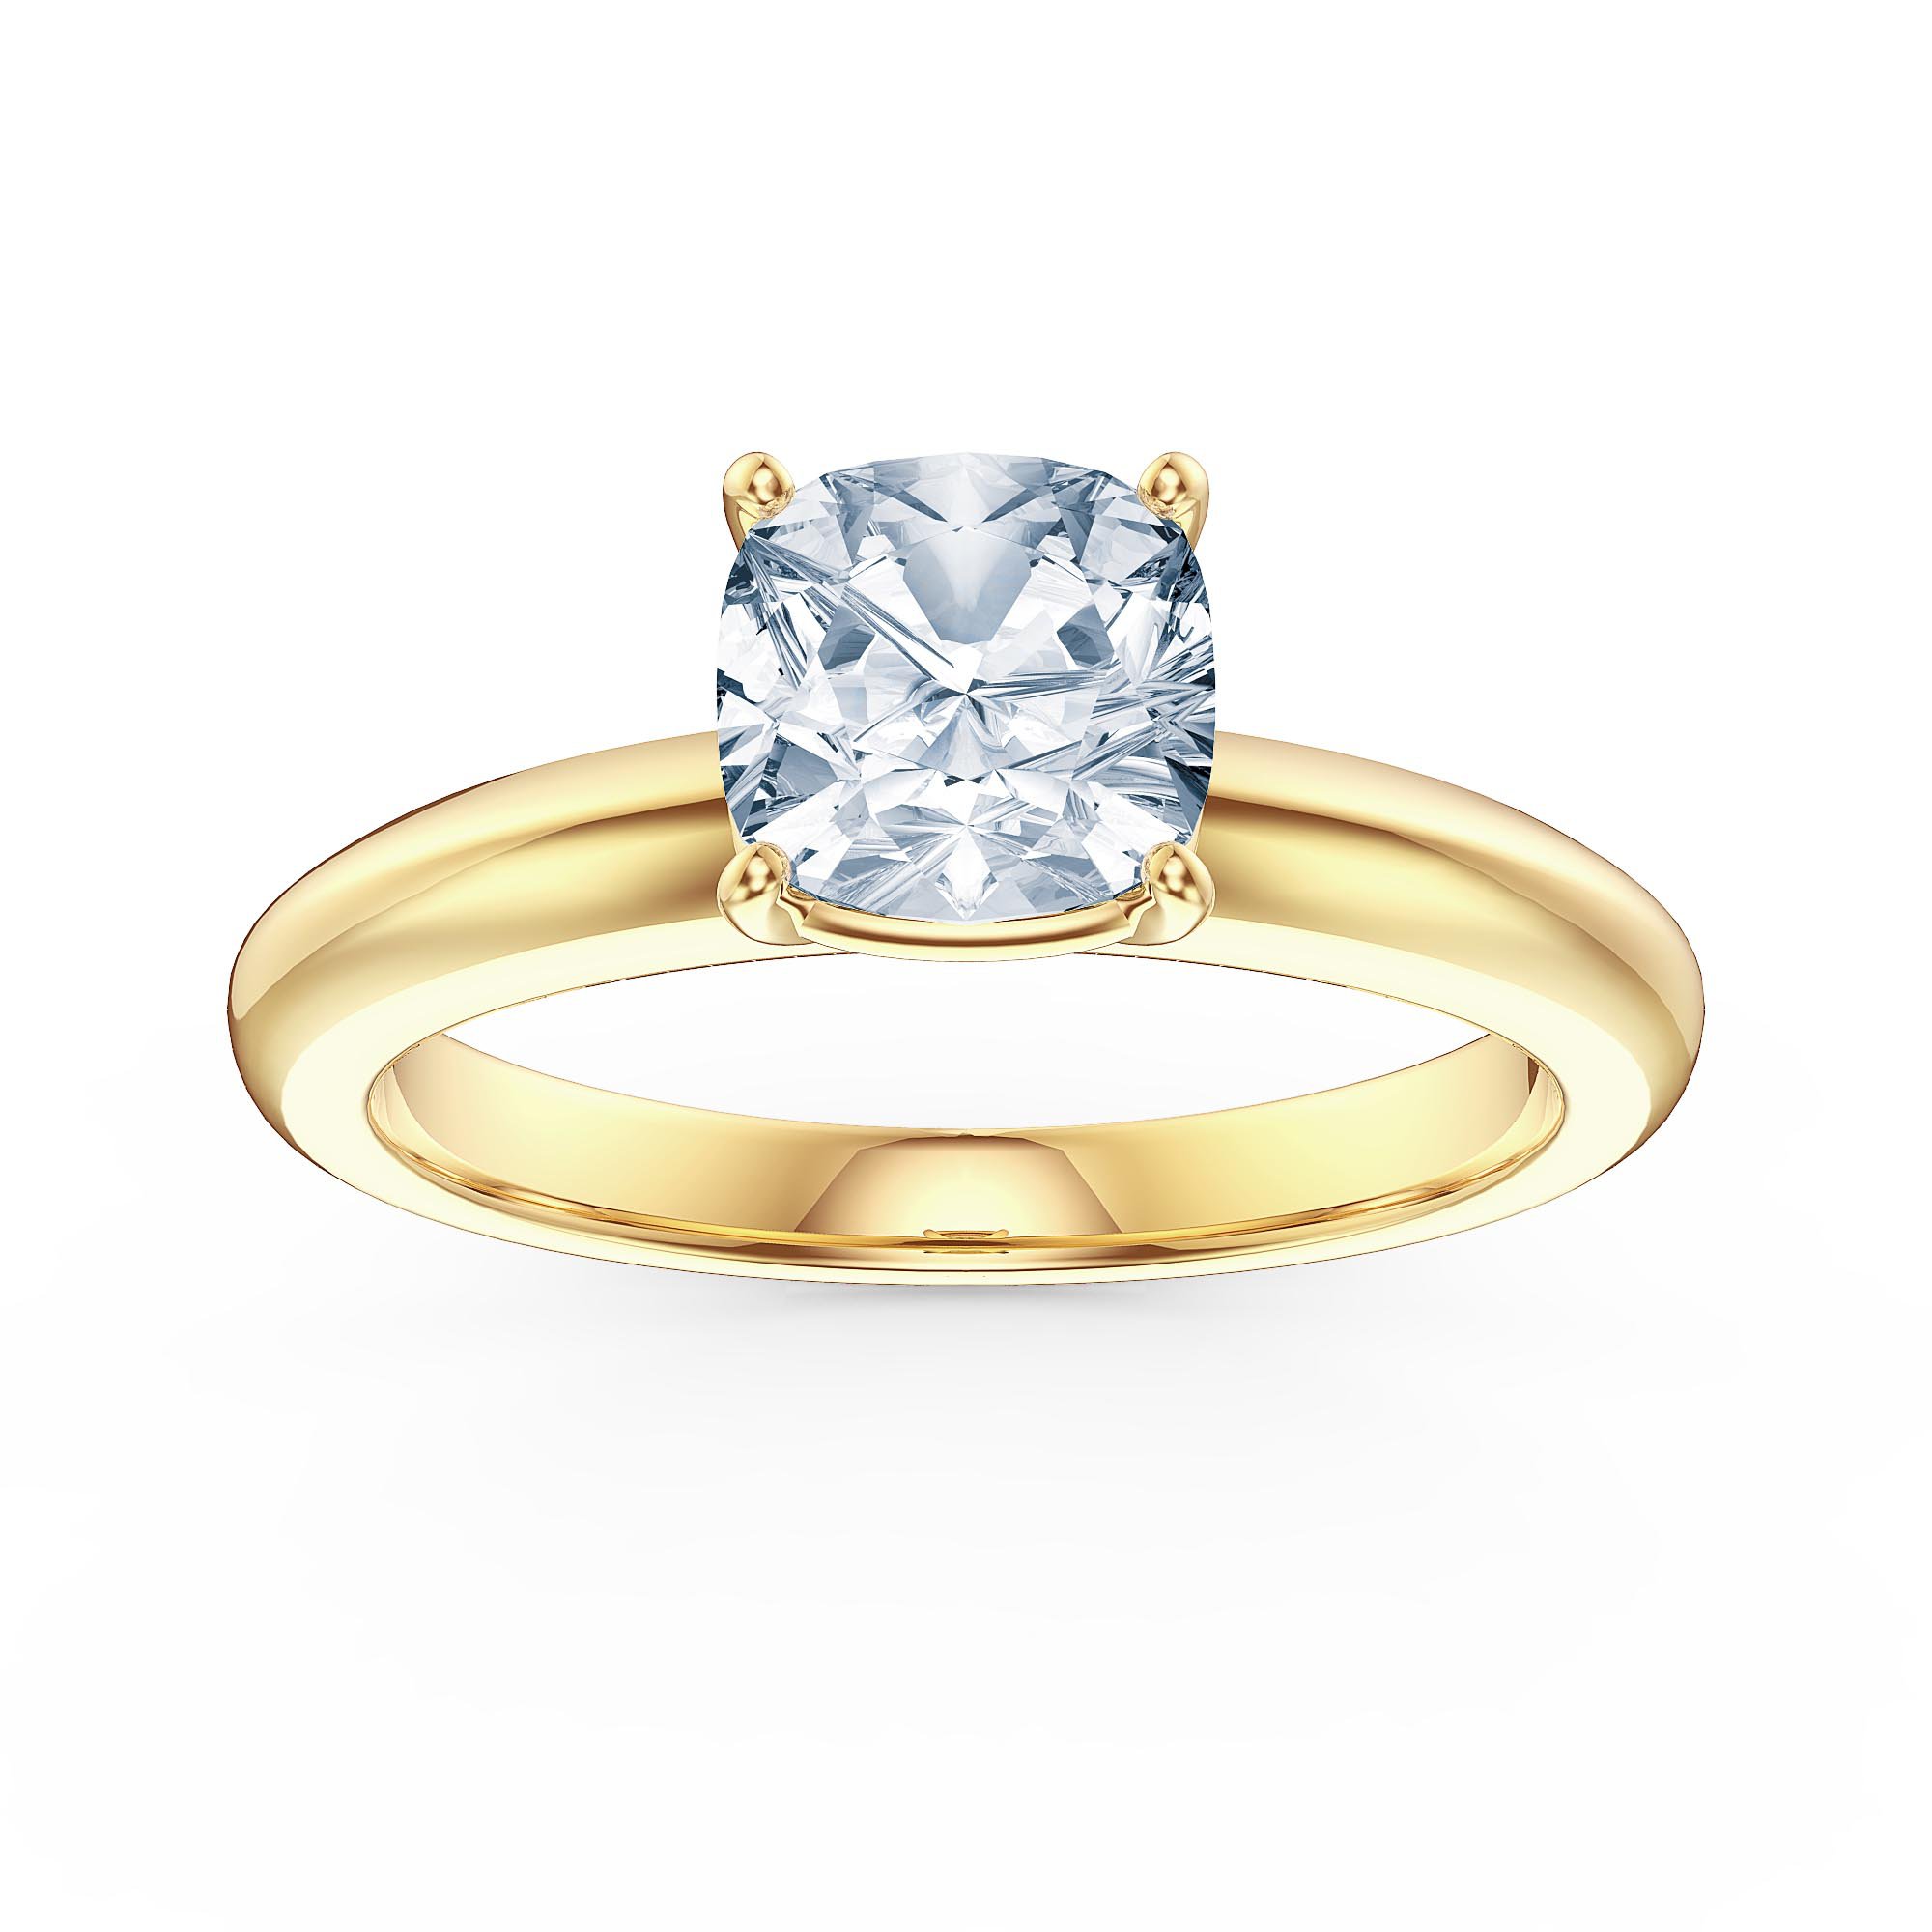 Details about   1ct Cushion Cut Blue Aquamarine Solitaire Engagement Ring 18k White Gold Finish